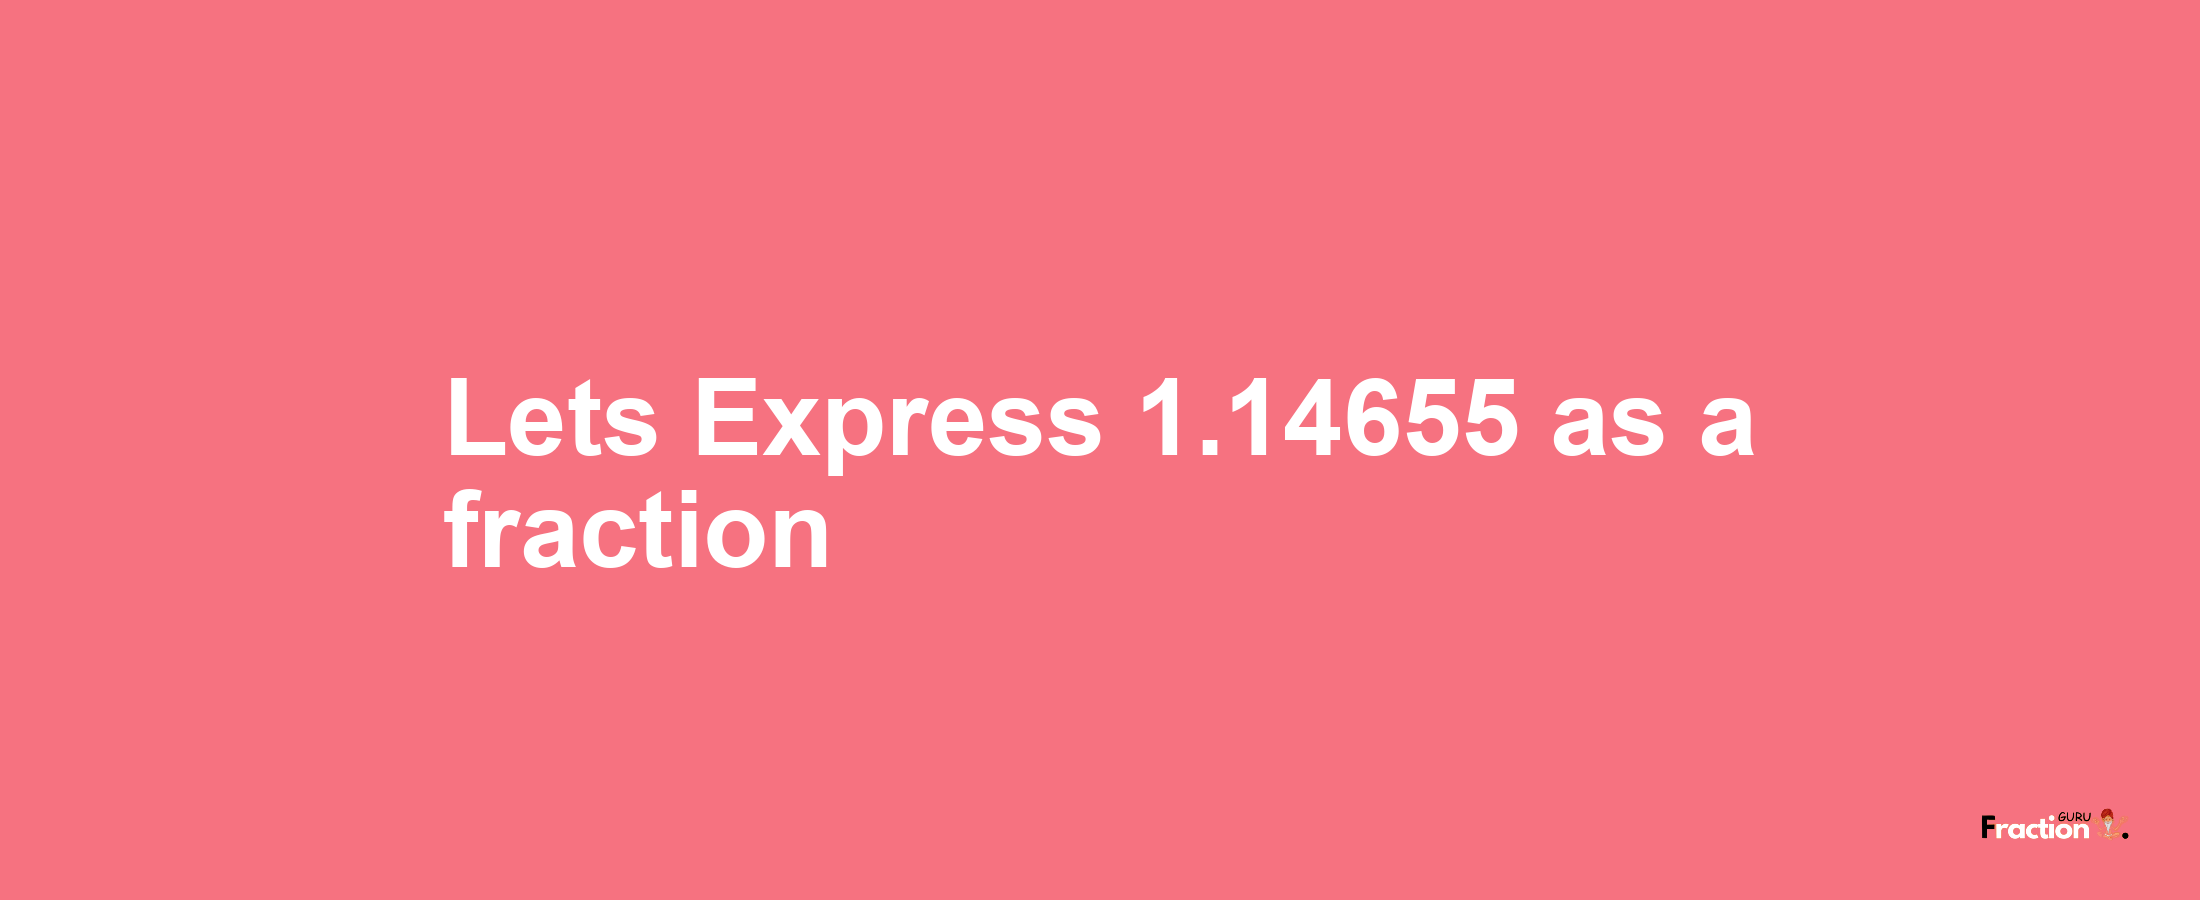 Lets Express 1.14655 as afraction